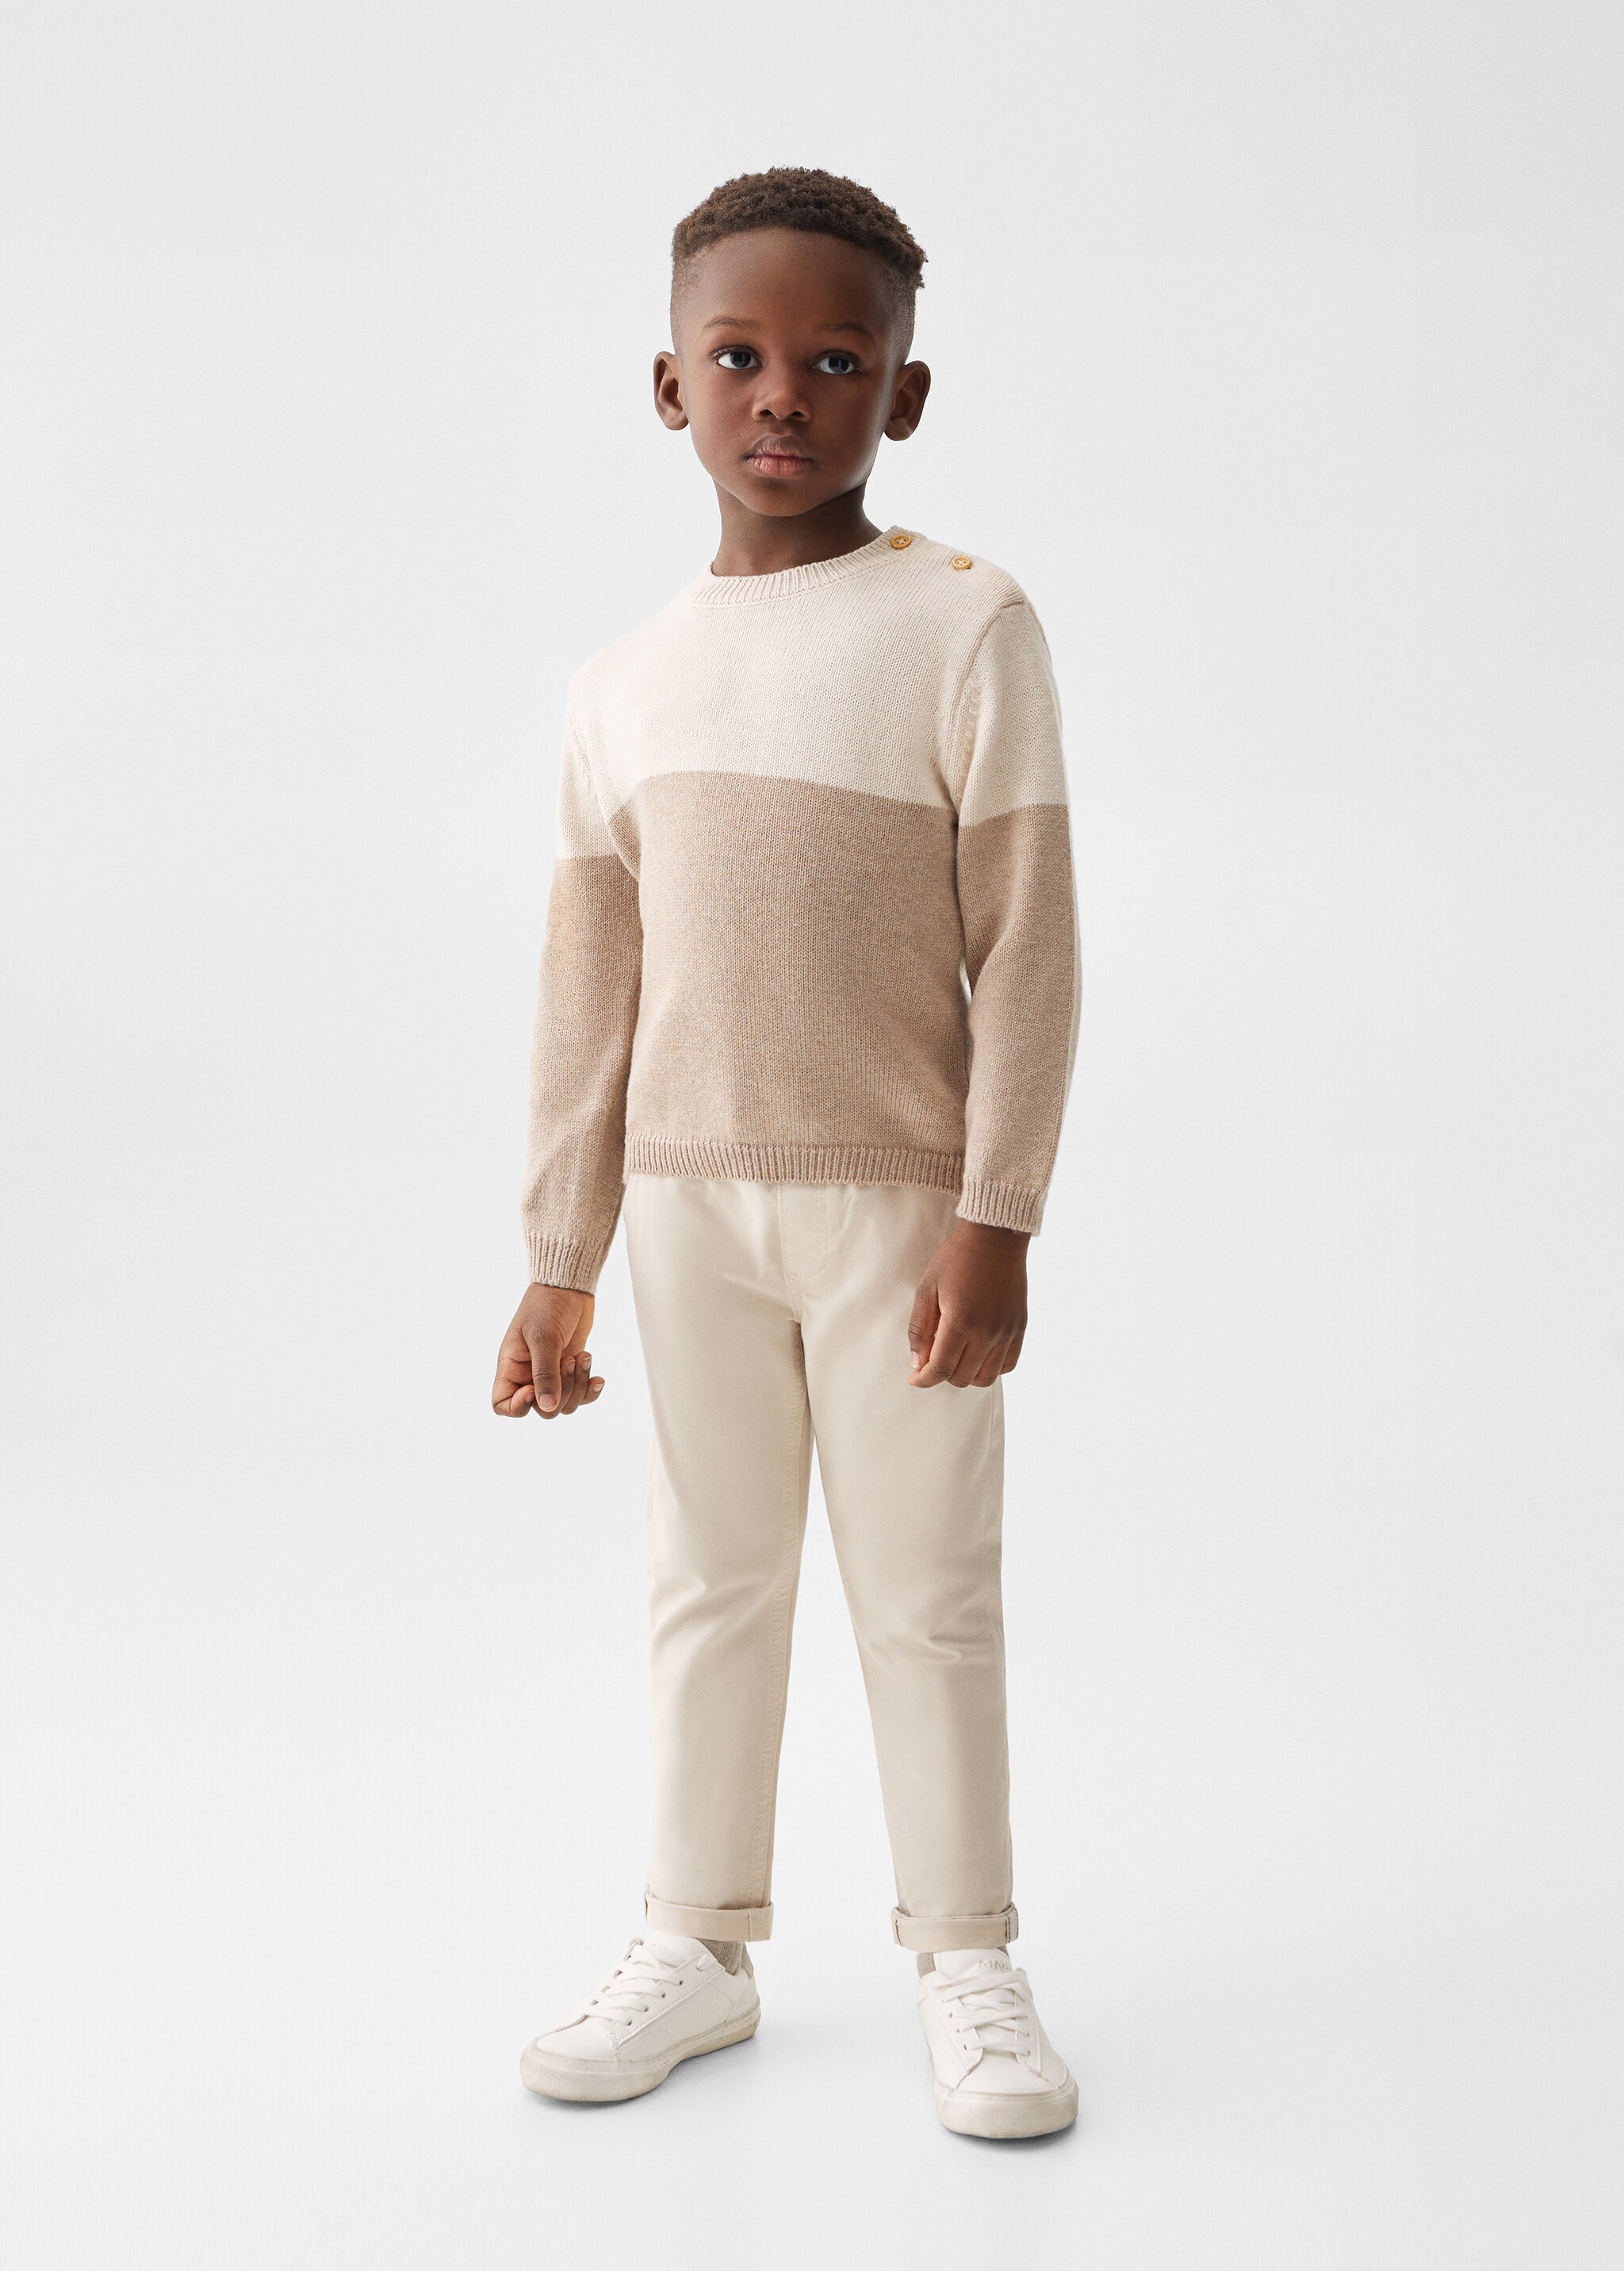 Contrasting knit sweater - General plane